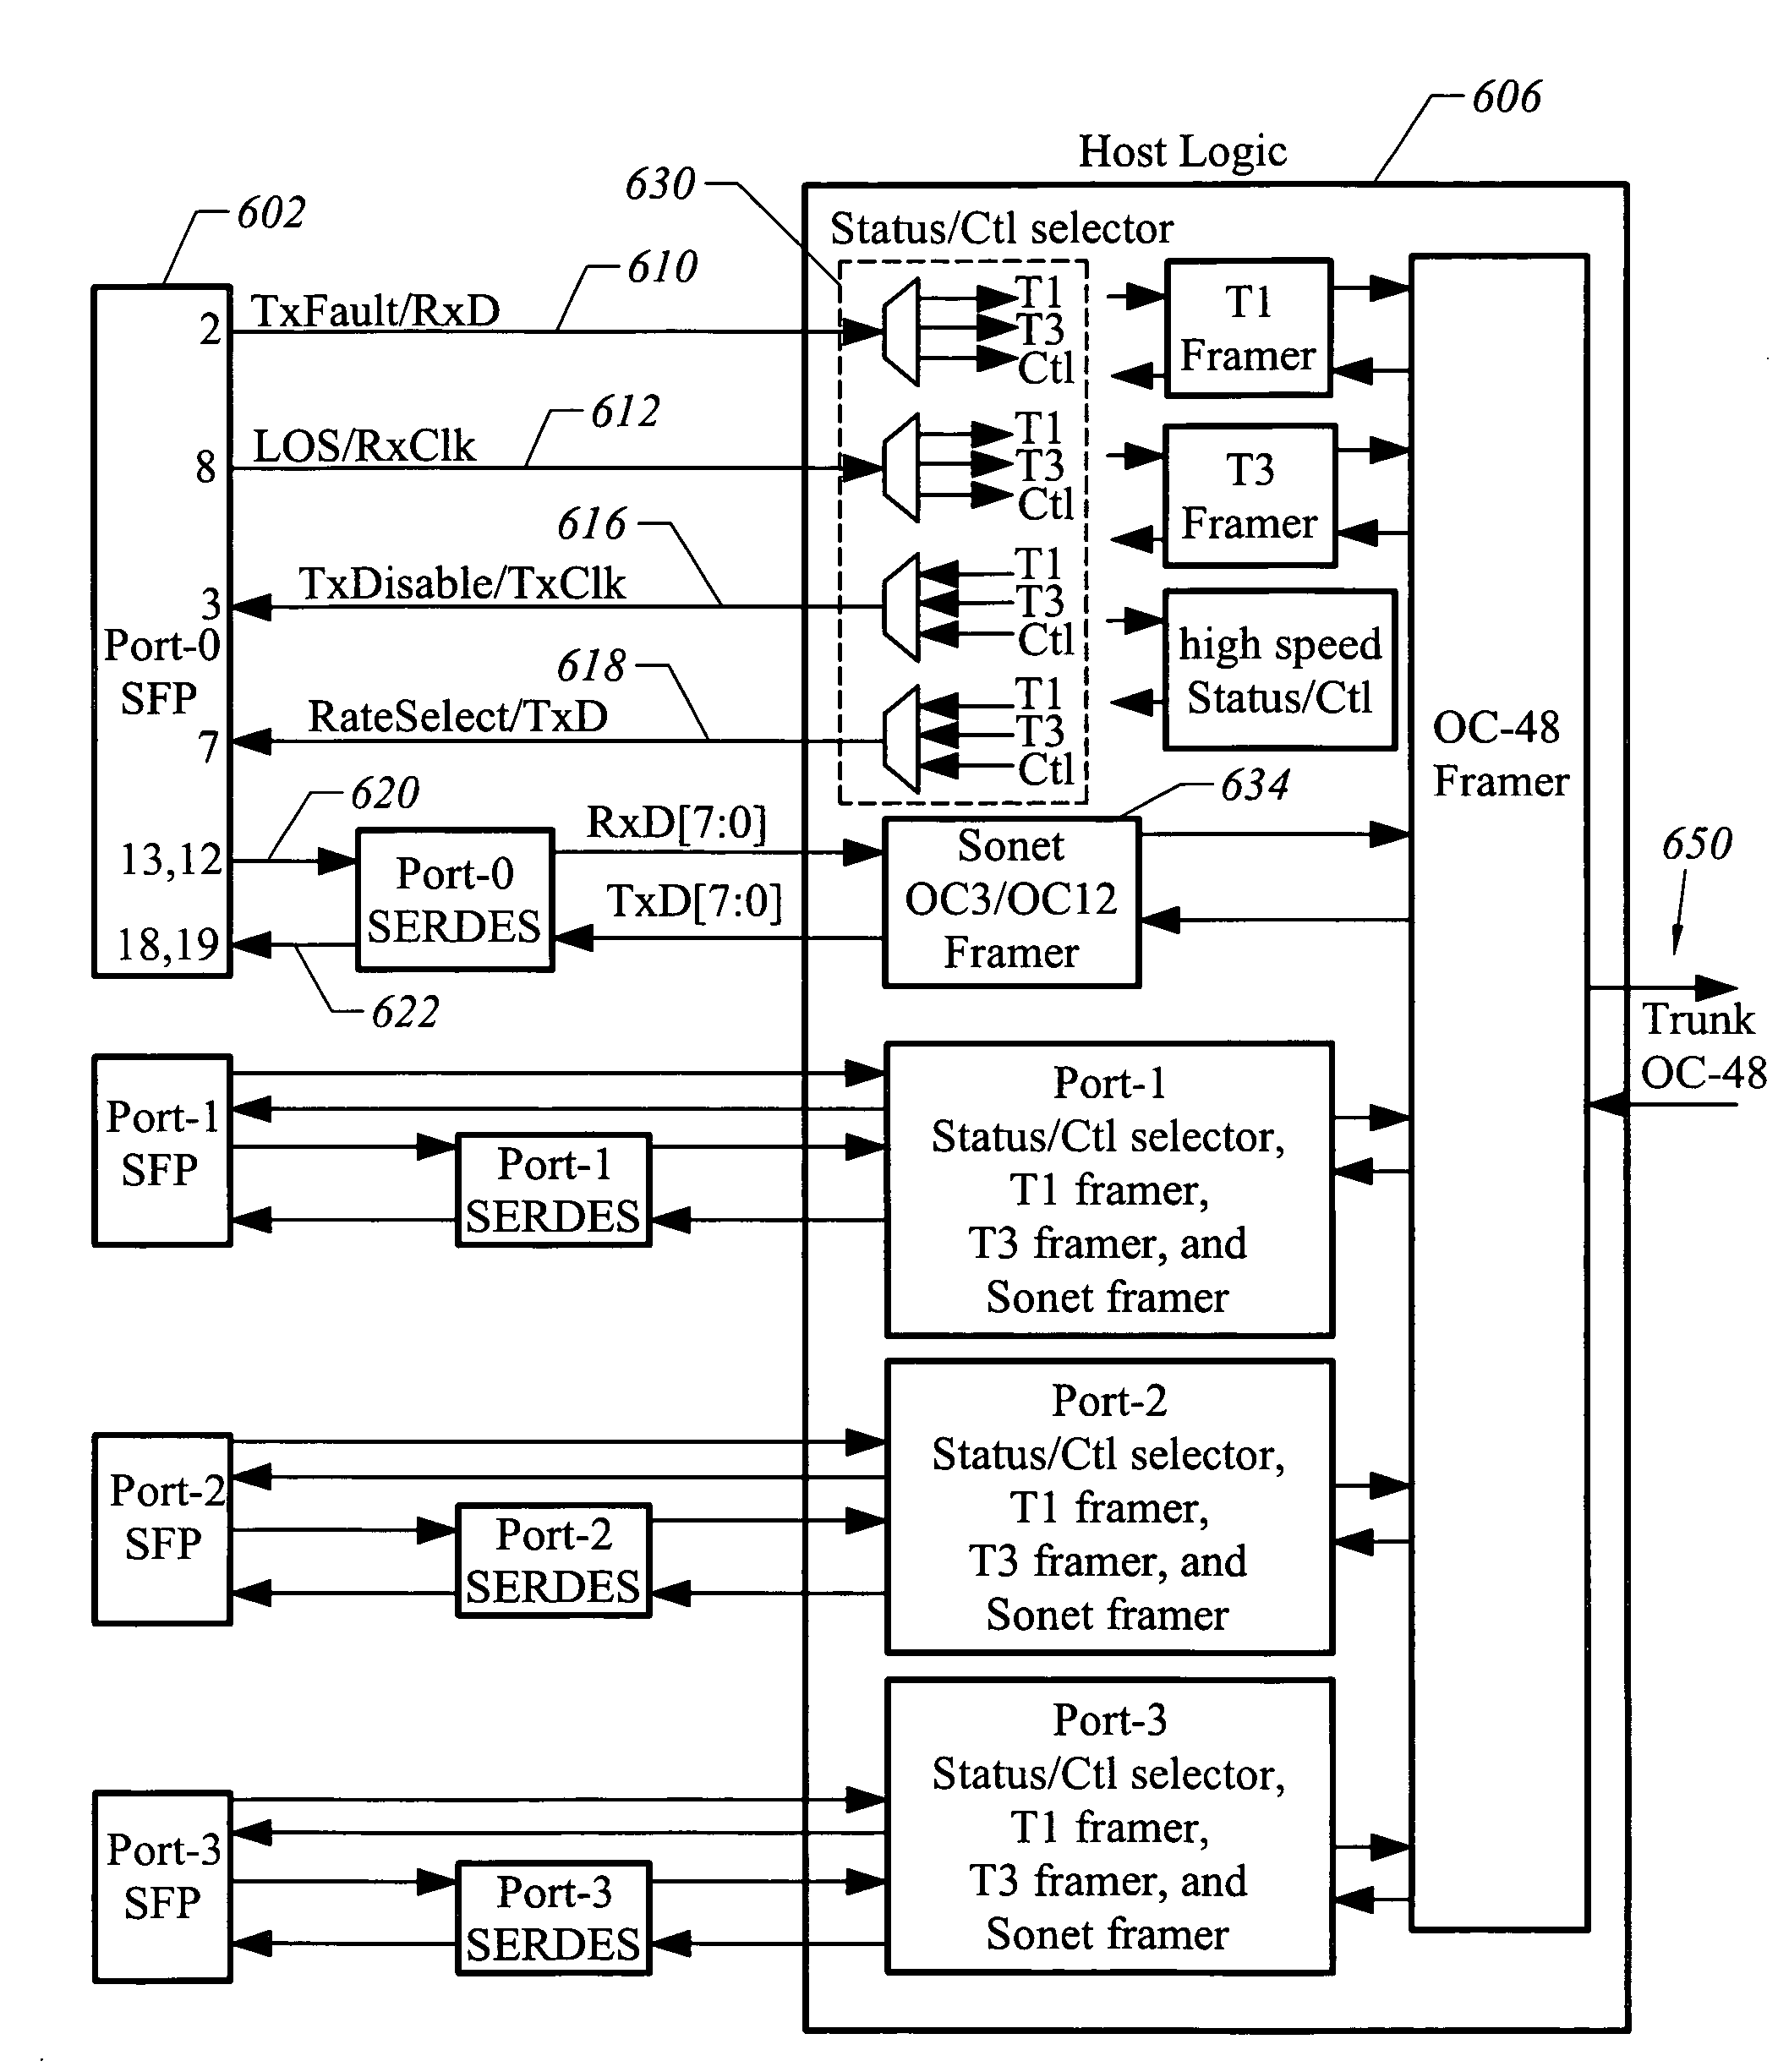 Low speed data path for SFP-MSA interface